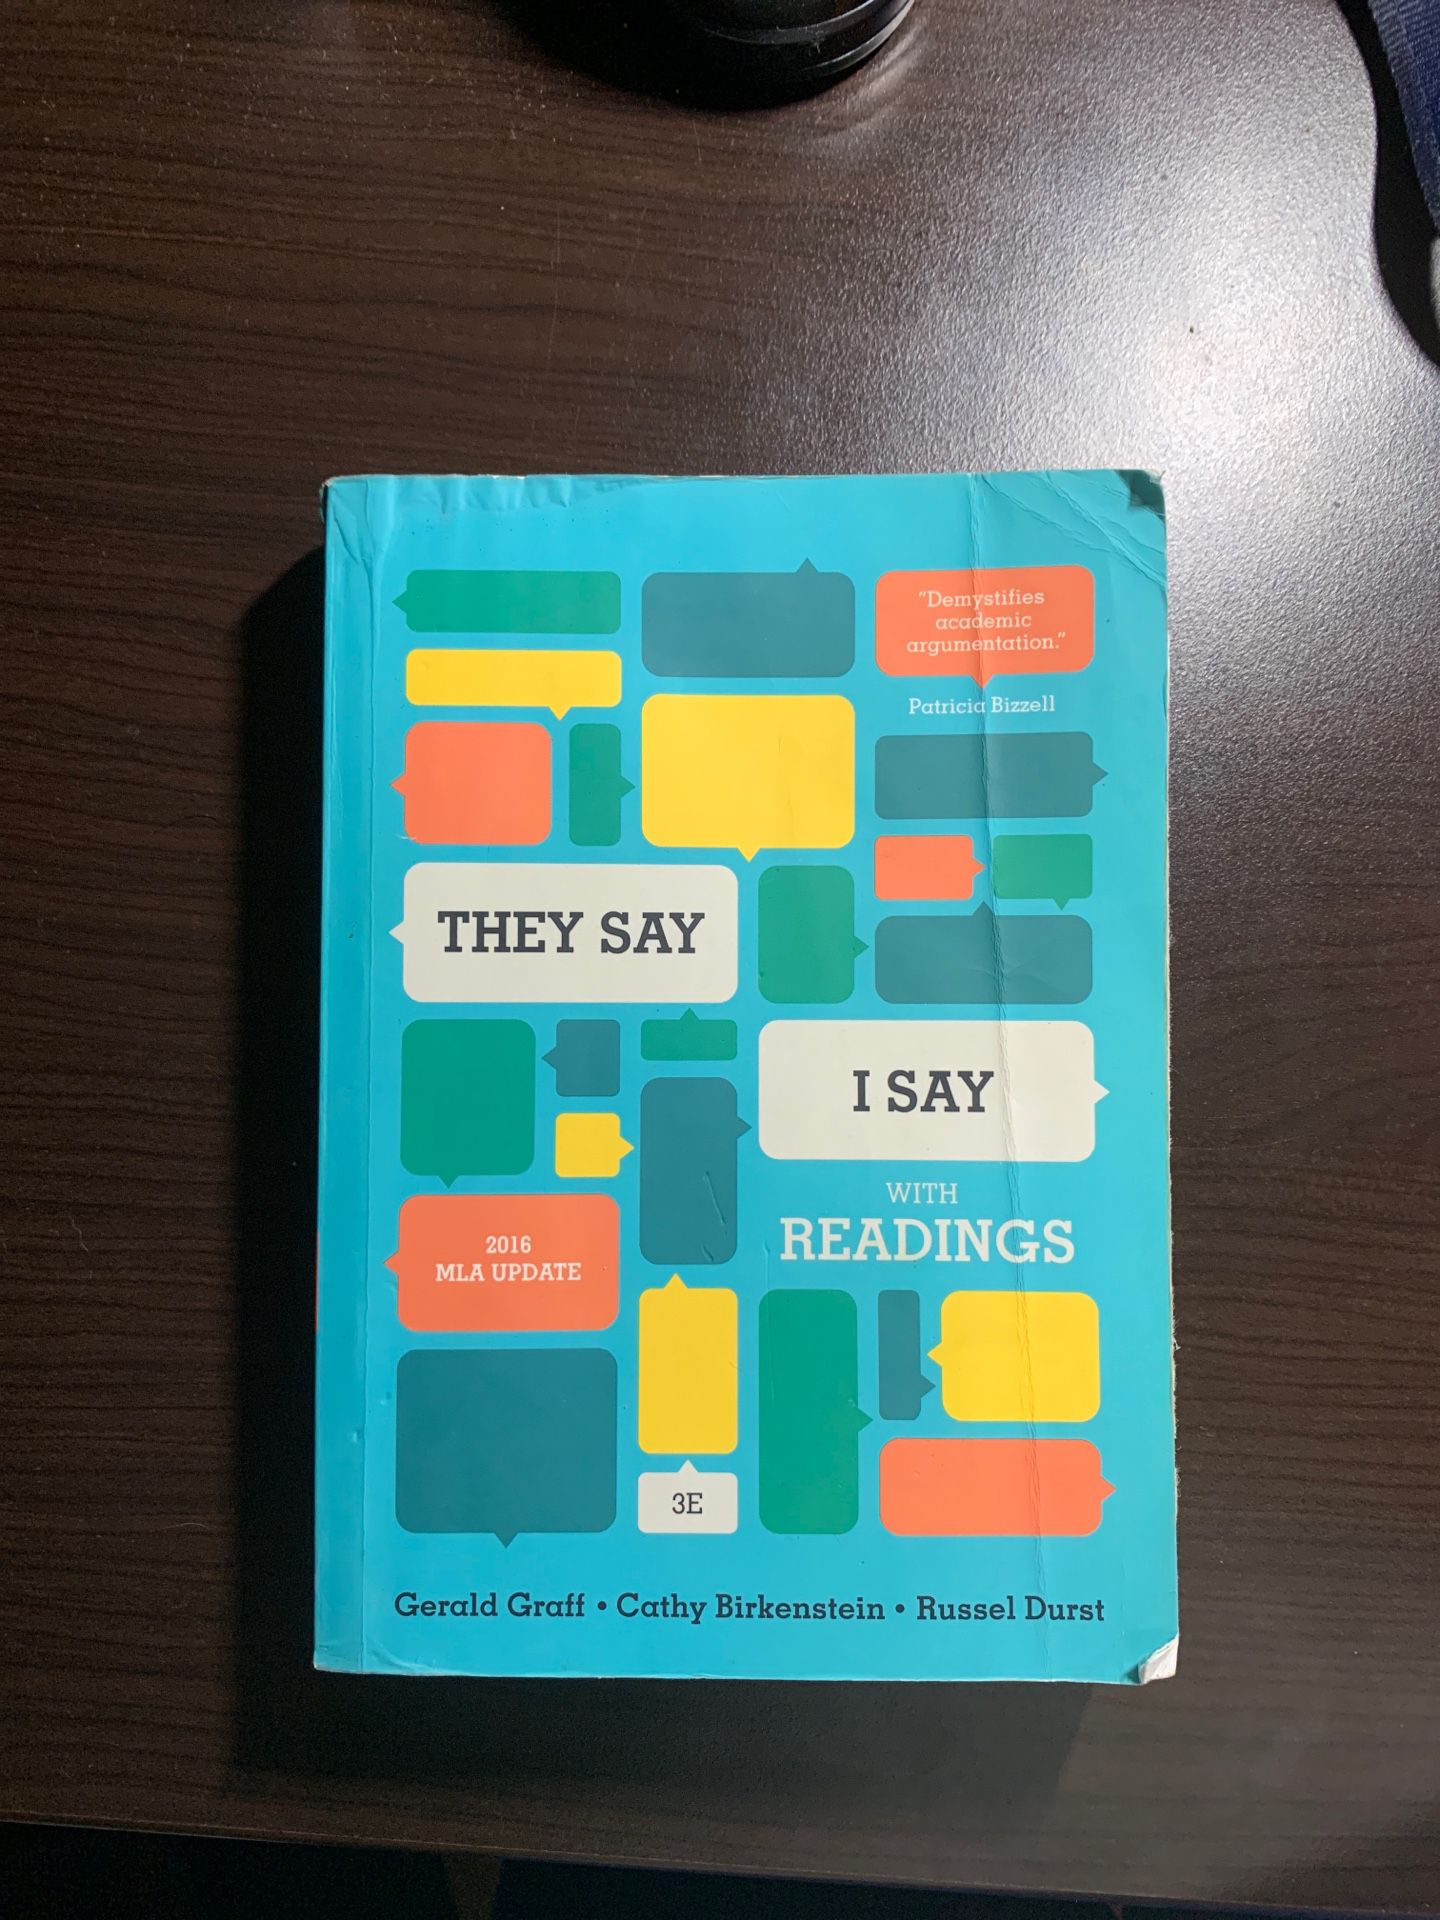 “THEY SAY I SAY” 3rd edition by Gerald Graff •Cathy Birkenstein • Russel Durst